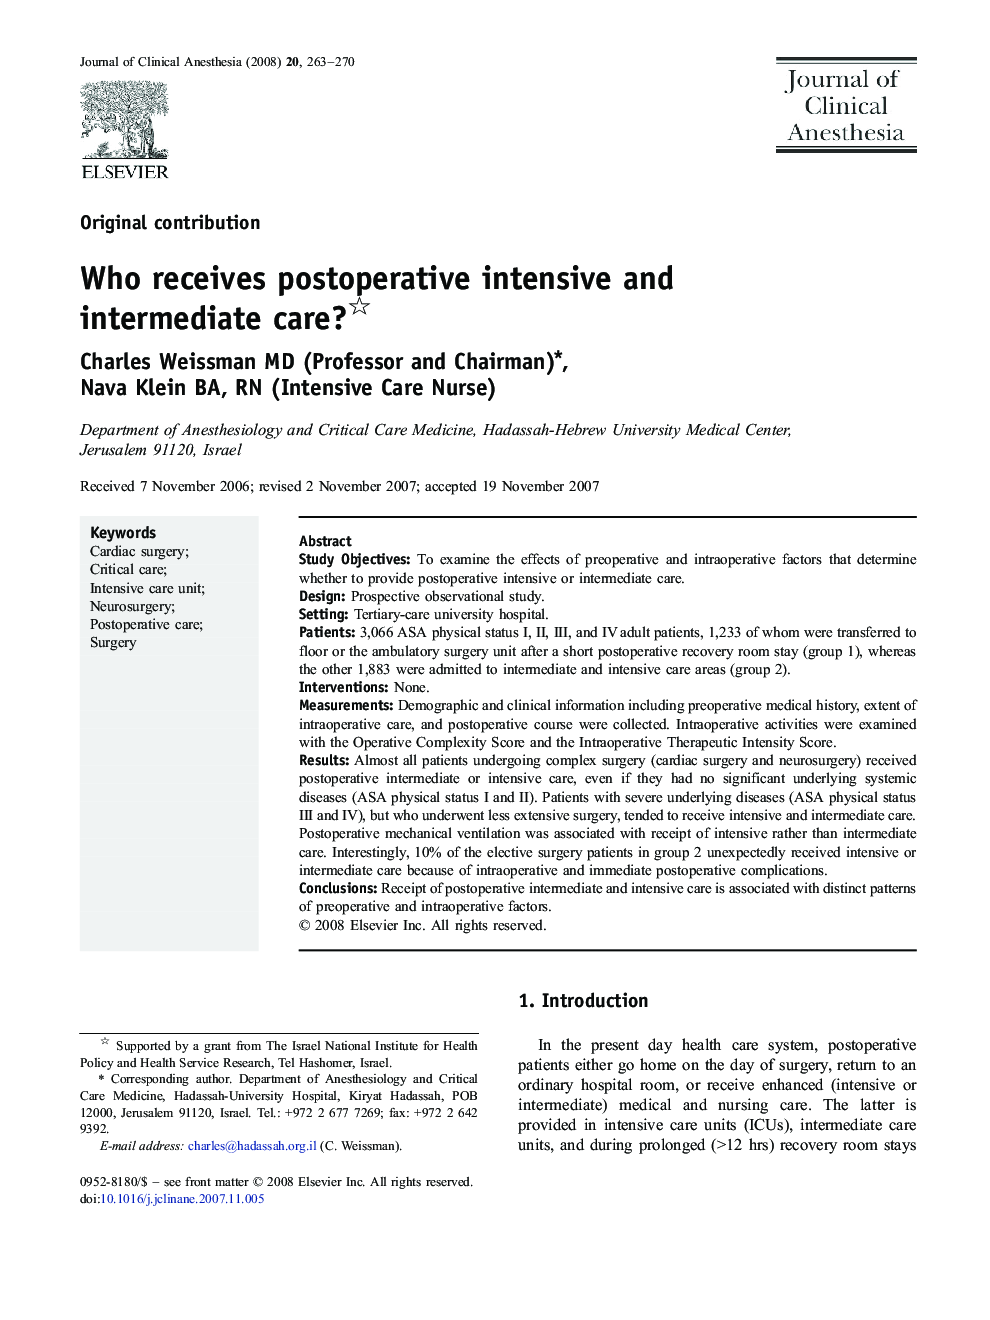 Who receives postoperative intensive and intermediate care? 